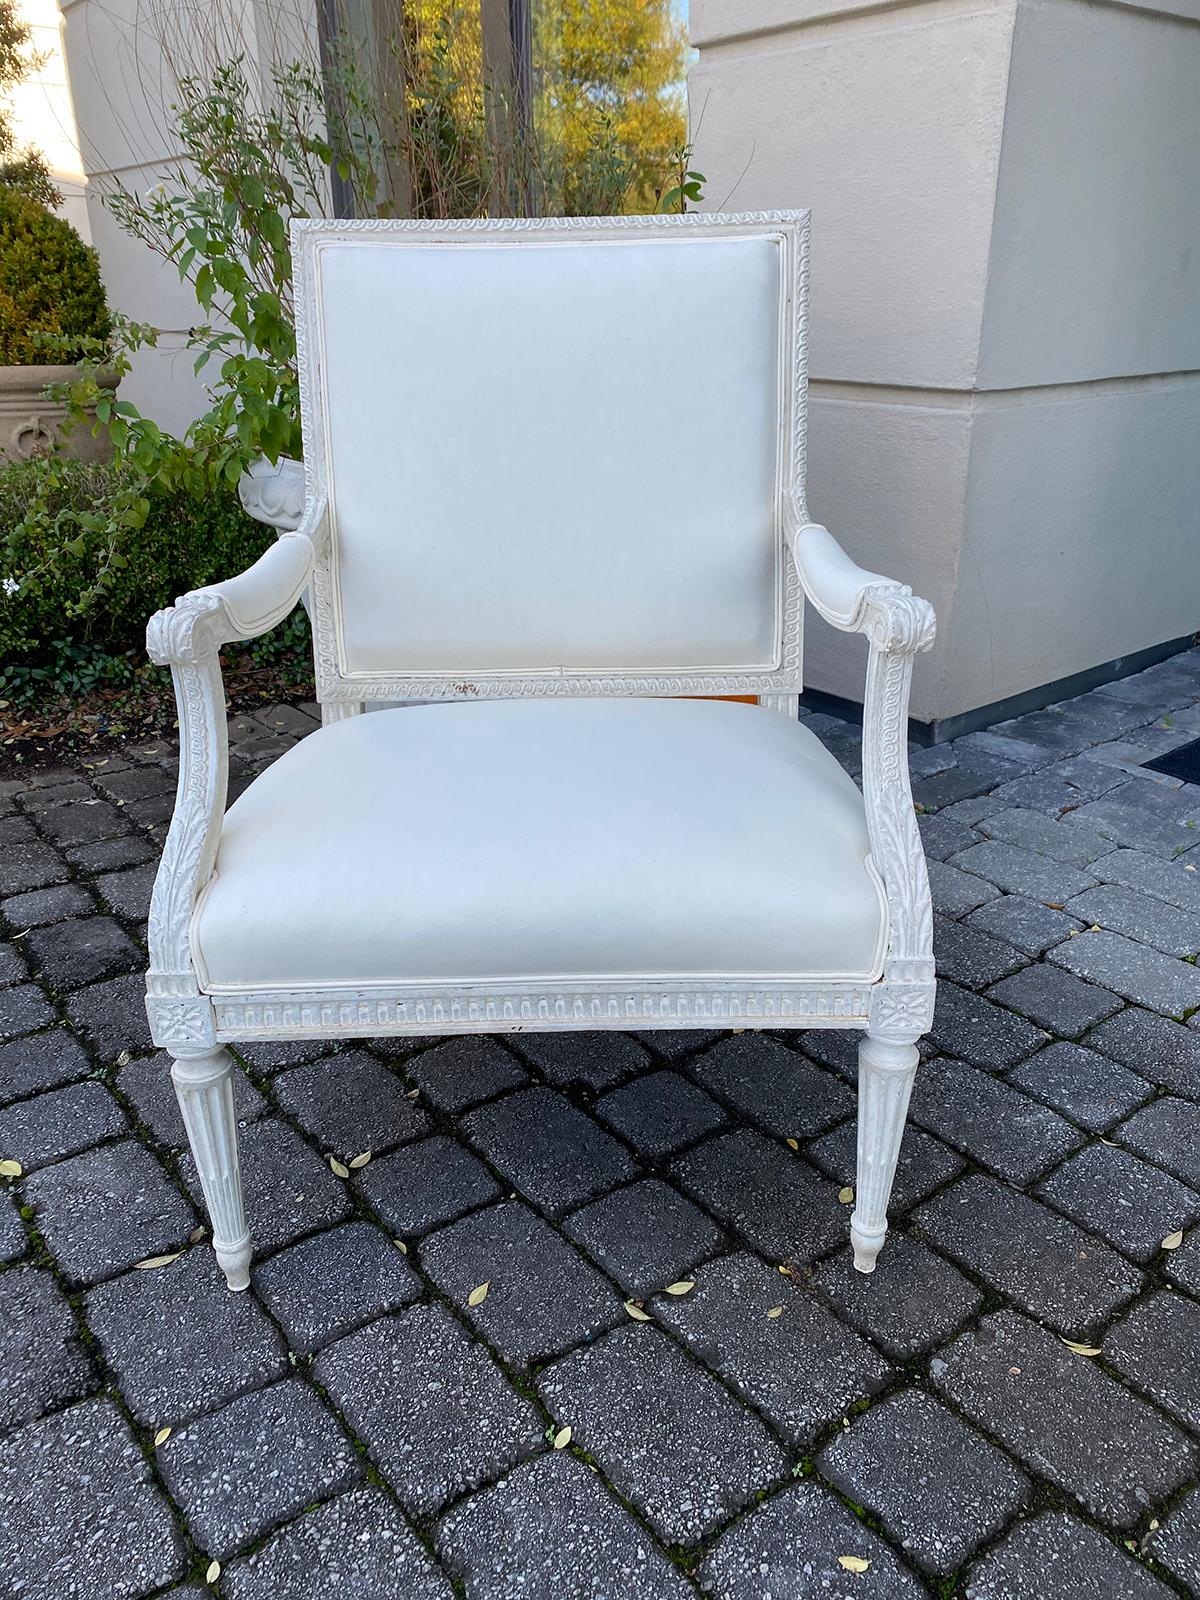 19th century French Louis XVI style finely carved fauteuil chair with custom painted finish.
Recovered in muslin
Measures: Seat: 18